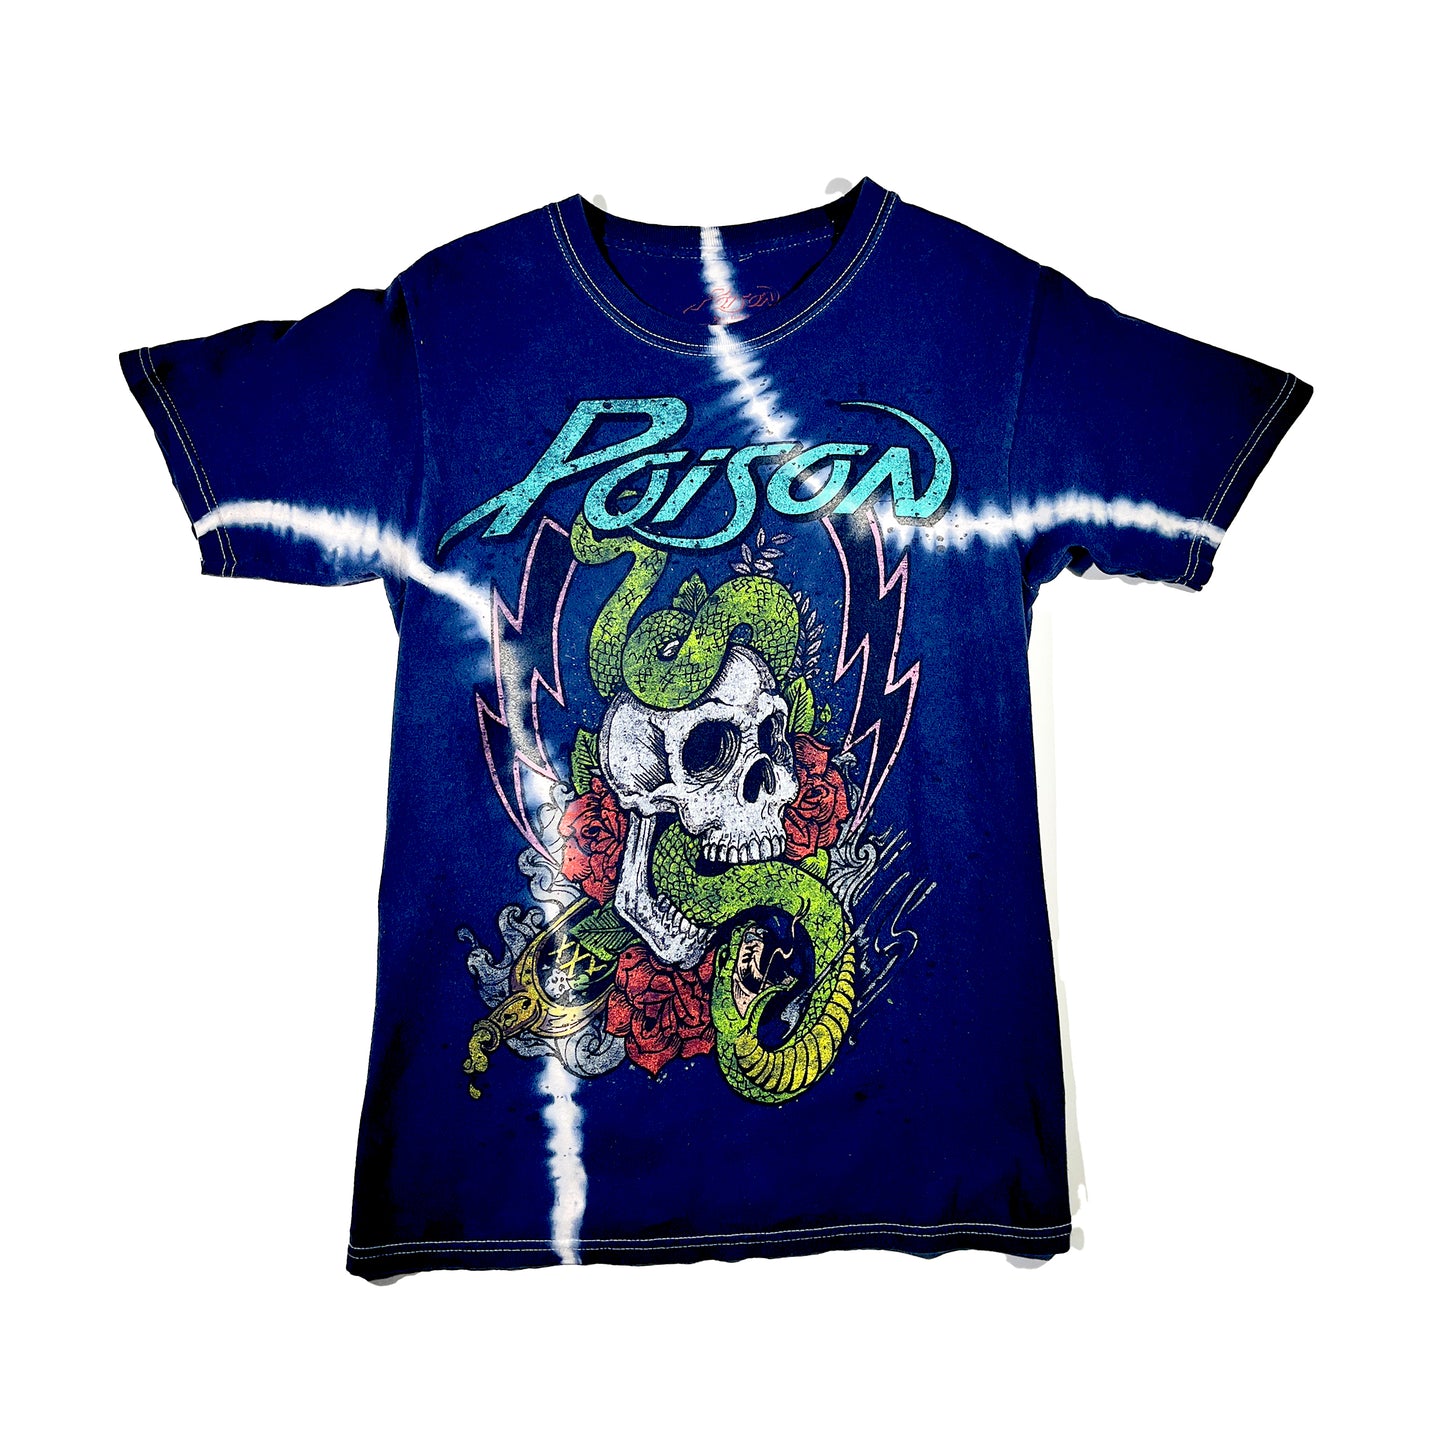 Vintage Poison T-Shirt Band Tee